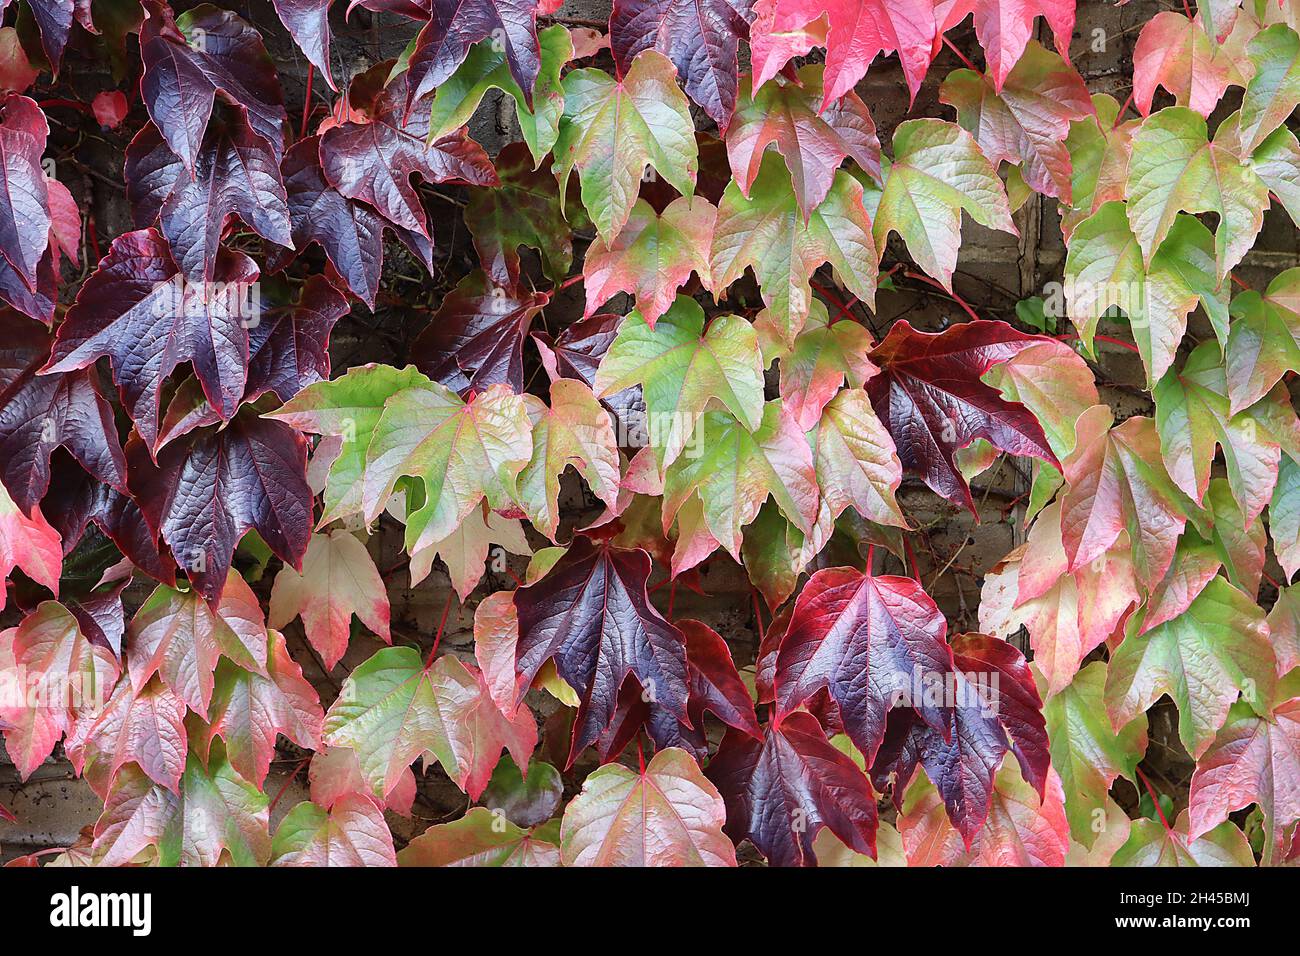 Parthenocissus tricuspidata Boston ivy – large three-lobed burgundy, purple, coral red and pale green leaves, October, England, UK Stock Photo